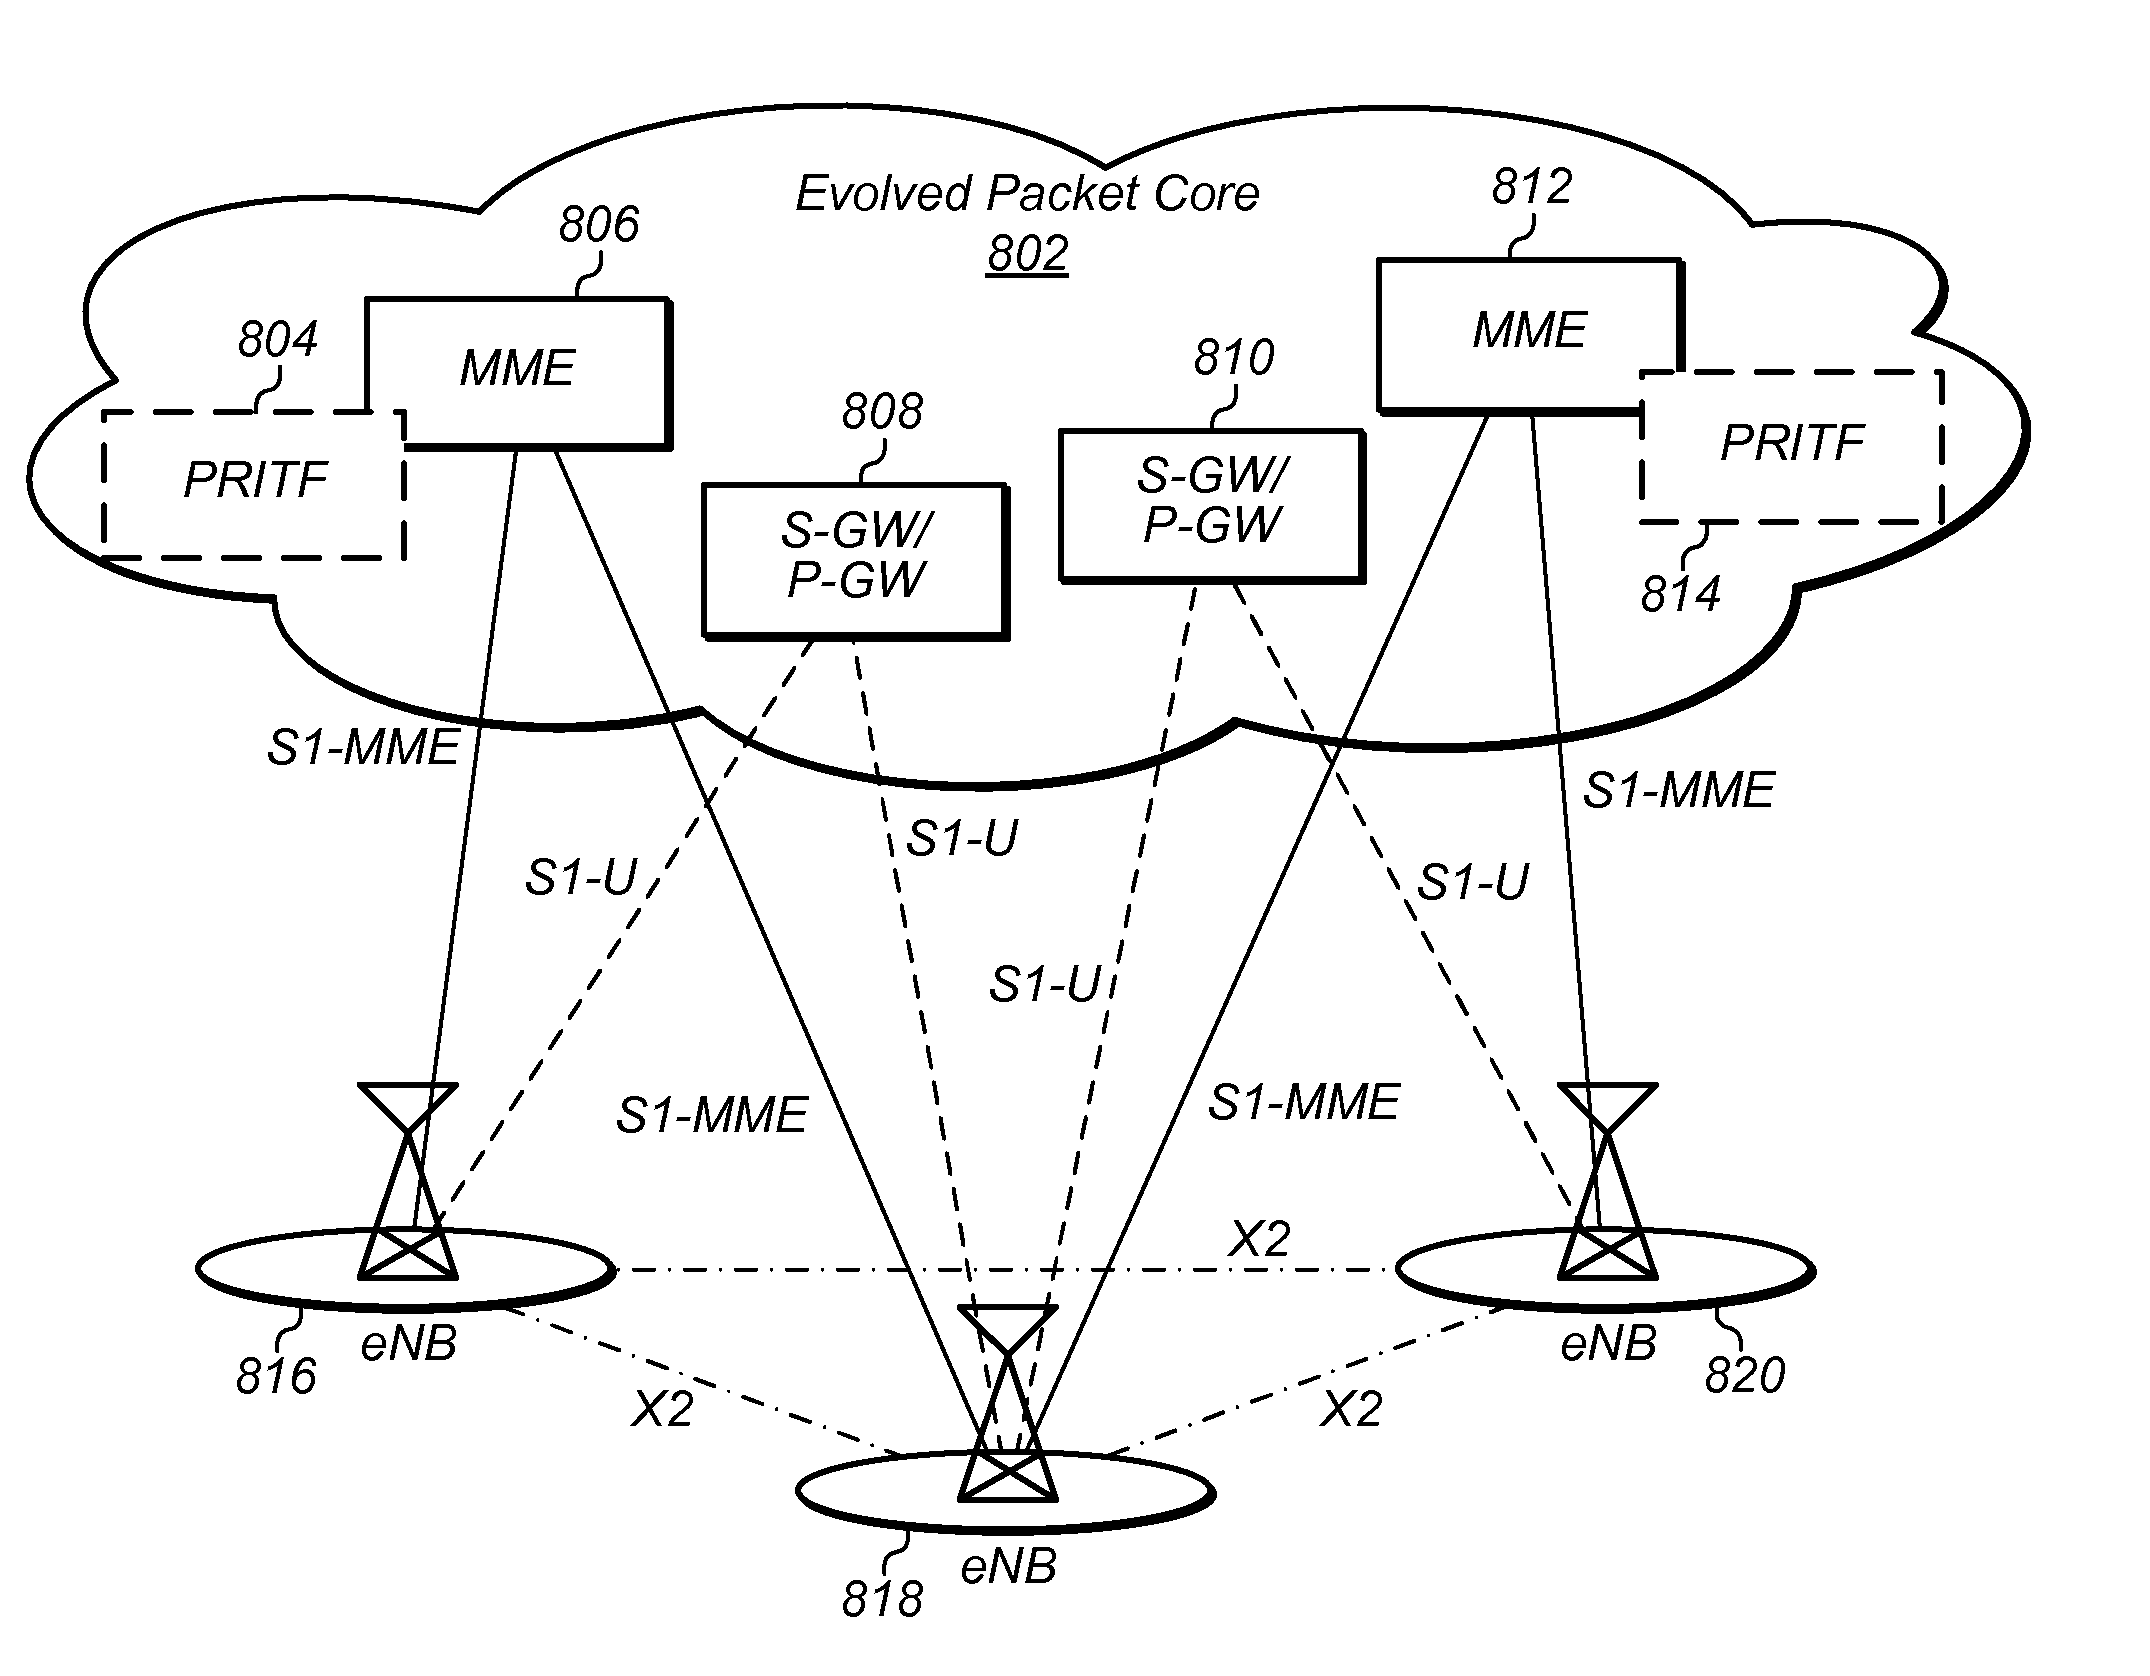 Distributed computing in a wireless communication system